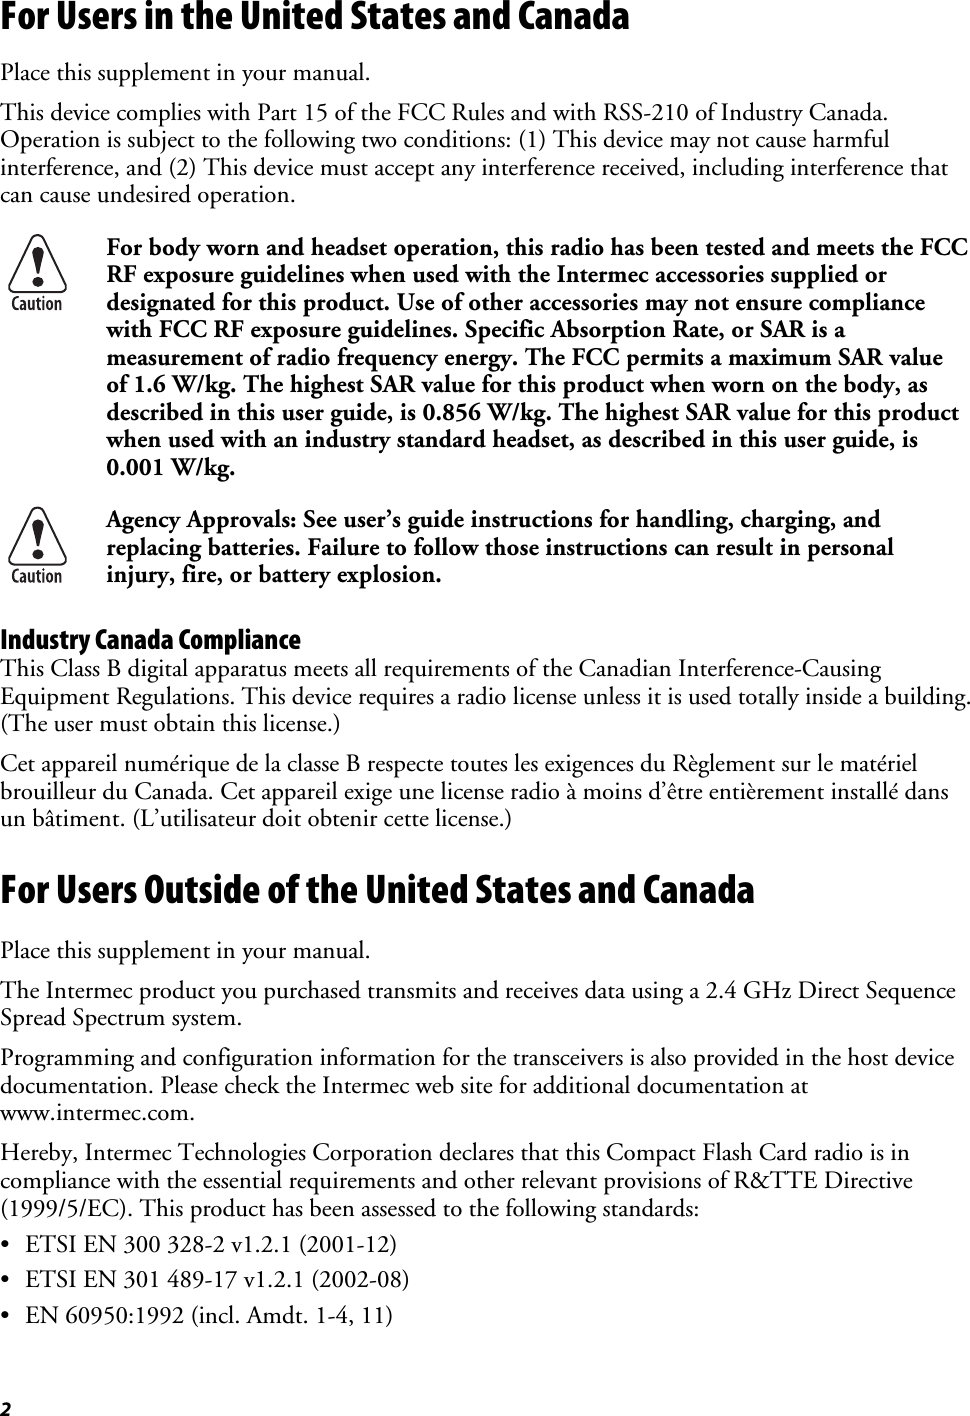 2 For Users in the United States and Canada Place this supplement in your manual. This device complies with Part 15 of the FCC Rules and with RSS-210 of Industry Canada. Operation is subject to the following two conditions: (1) This device may not cause harmful interference, and (2) This device must accept any interference received, including interference that can cause undesired operation.  For body worn and headset operation, this radio has been tested and meets the FCC RF exposure guidelines when used with the Intermec accessories supplied or designated for this product. Use of other accessories may not ensure compliance with FCC RF exposure guidelines. Specific Absorption Rate, or SAR is a measurement of radio frequency energy. The FCC permits a maximum SAR value of 1.6 W/kg. The highest SAR value for this product when worn on the body, as described in this user guide, is 0.856 W/kg. The highest SAR value for this product when used with an industry standard headset, as described in this user guide, is 0.001 W/kg.  Agency Approvals: See user’s guide instructions for handling, charging, and replacing batteries. Failure to follow those instructions can result in personal injury, fire, or battery explosion. Industry Canada Compliance This Class B digital apparatus meets all requirements of the Canadian Interference-Causing Equipment Regulations. This device requires a radio license unless it is used totally inside a building. (The user must obtain this license.) Cet appareil numérique de la classe B respecte toutes les exigences du Règlement sur le matériel brouilleur du Canada. Cet appareil exige une license radio à moins d’être entièrement installé dans un bâtiment. (L’utilisateur doit obtenir cette license.) For Users Outside of the United States and Canada Place this supplement in your manual. The Intermec product you purchased transmits and receives data using a 2.4 GHz Direct Sequence Spread Spectrum system. Programming and configuration information for the transceivers is also provided in the host device documentation. Please check the Intermec web site for additional documentation at www.intermec.com. Hereby, Intermec Technologies Corporation declares that this Compact Flash Card radio is in compliance with the essential requirements and other relevant provisions of R&amp;TTE Directive (1999/5/EC). This product has been assessed to the following standards: •  ETSI EN 300 328-2 v1.2.1 (2001-12) •  ETSI EN 301 489-17 v1.2.1 (2002-08) •  EN 60950:1992 (incl. Amdt. 1-4, 11) 